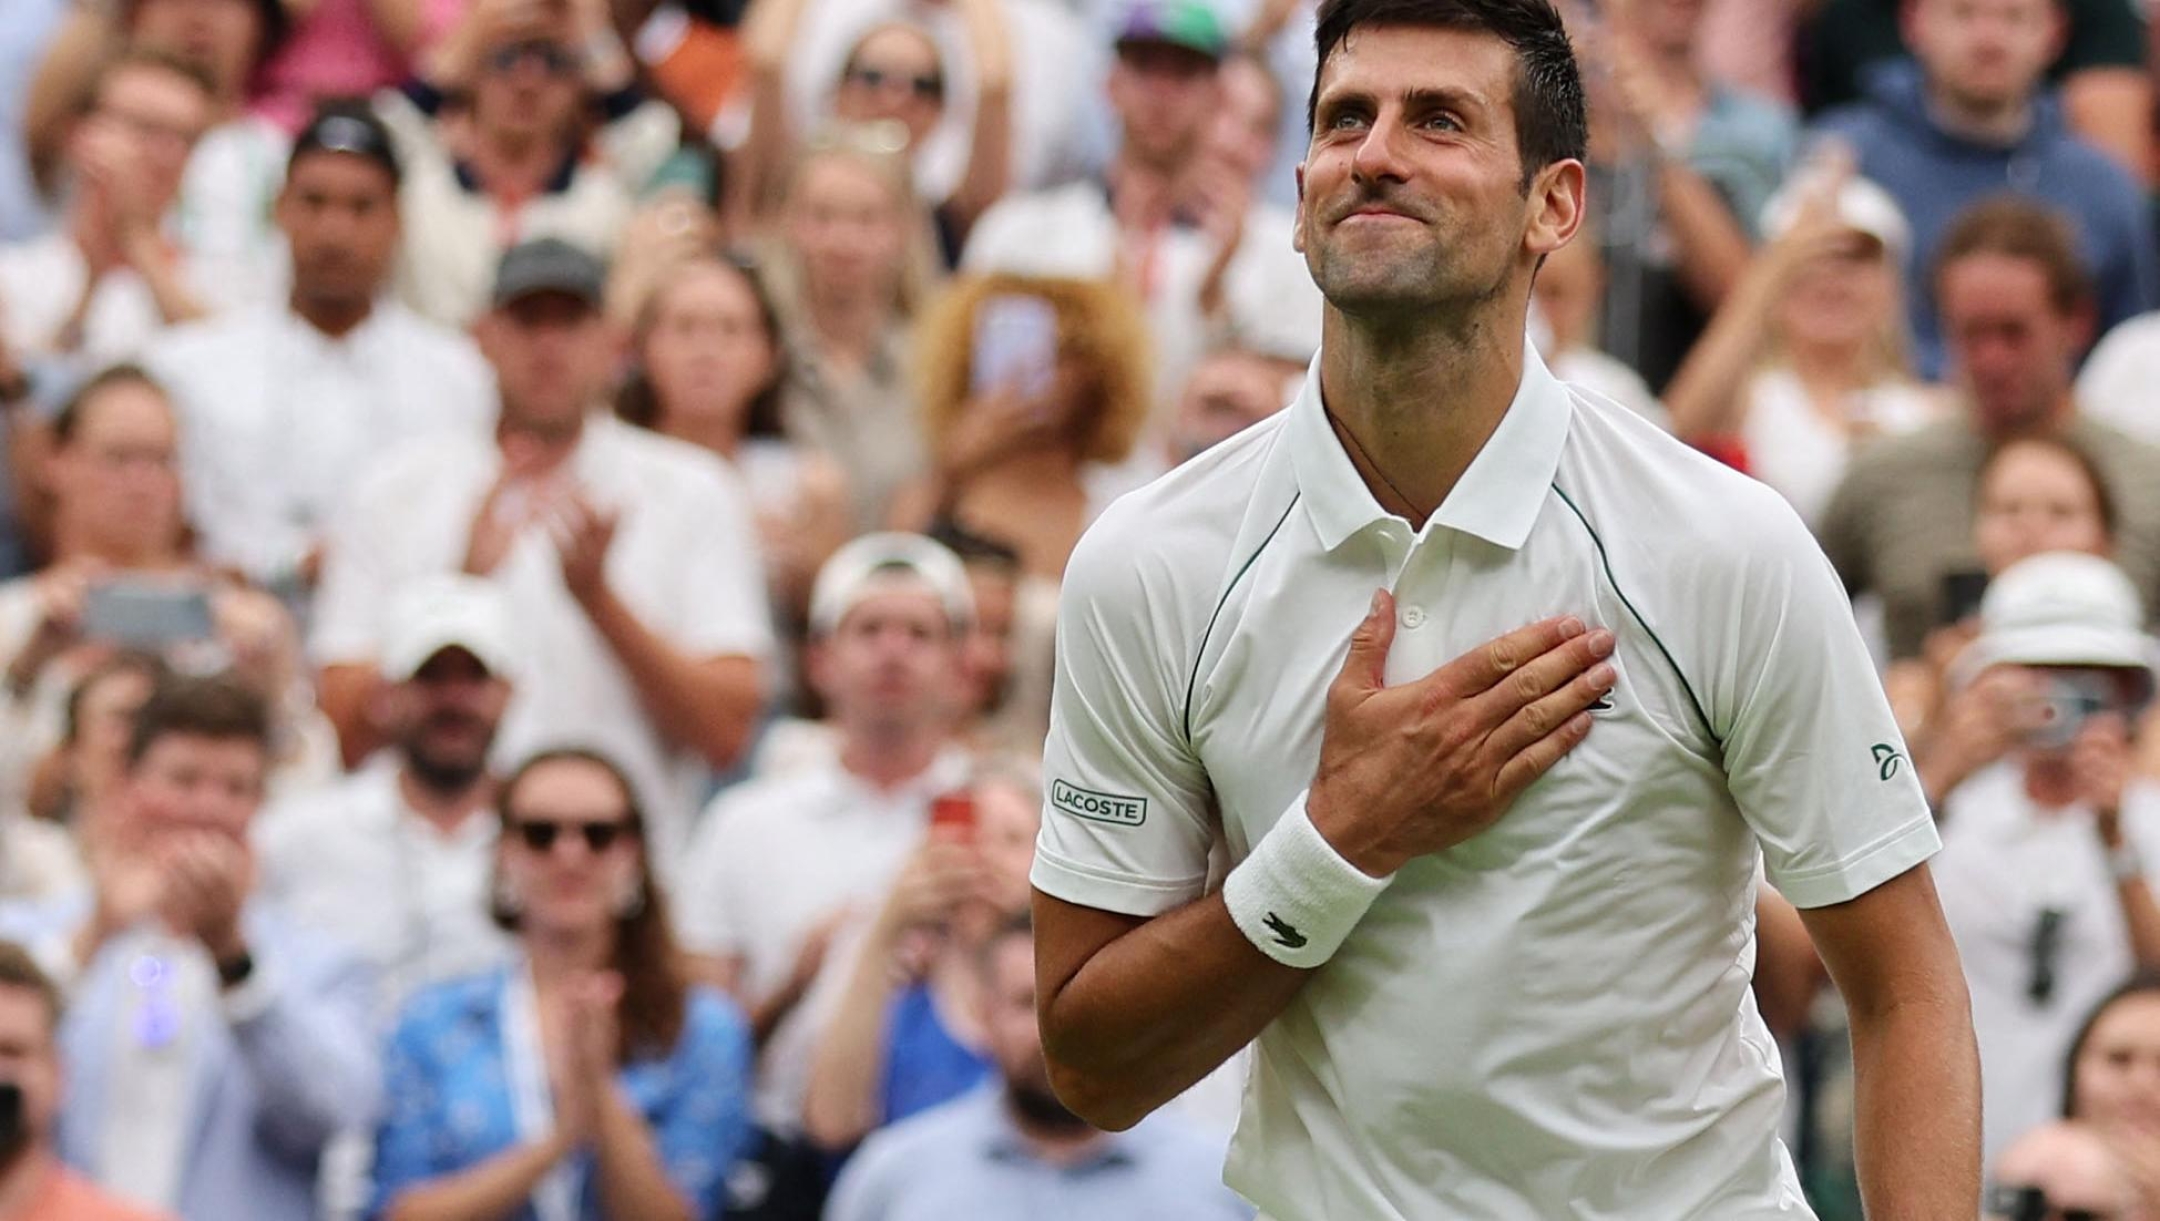 (FILES) Serbia's Novak Djokovic celebrates beating South Korea's Kwon Soon-woo after their men's singles tennis match on the first day of the 2022 Wimbledon Championships at The All England Tennis Club in Wimbledon, southwest London, on June 27, 2022. Novak Djokovic targets an eighth All England Club title and 24th Grand Slam crown at Wimbledon which gets underway on July 3, 2023. Djokovic's 84 wins at Wimbledon are more than the rest of the top 20 combined while nobody else in the top 10 has ever made a semi-final. (Photo by Adrian DENNIS / AFP) / RESTRICTED TO EDITORIAL USE